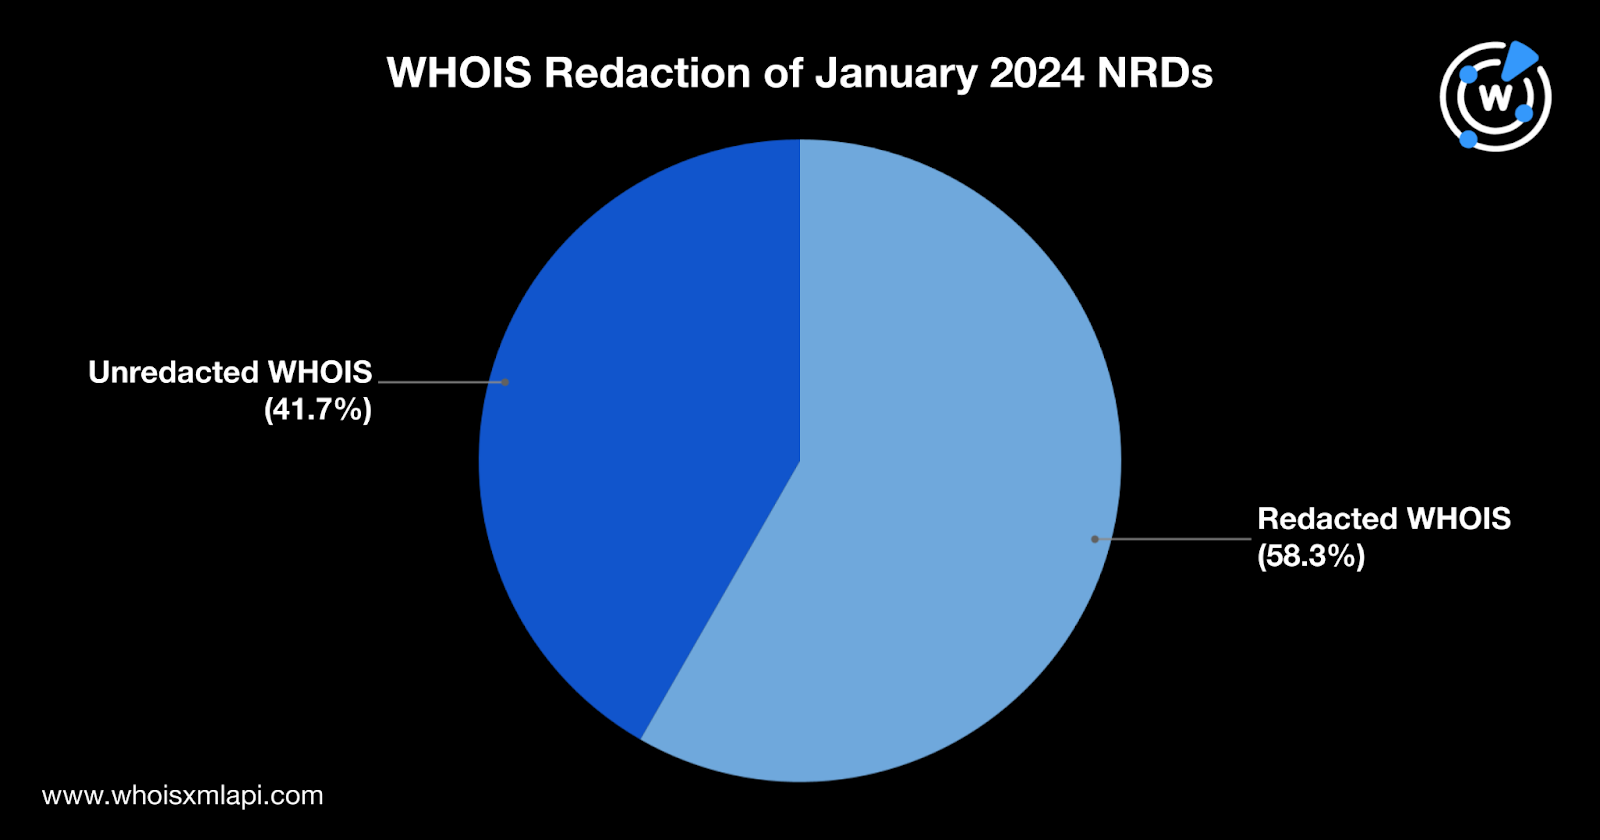 WHOIS redaction of January 2024 NRDs